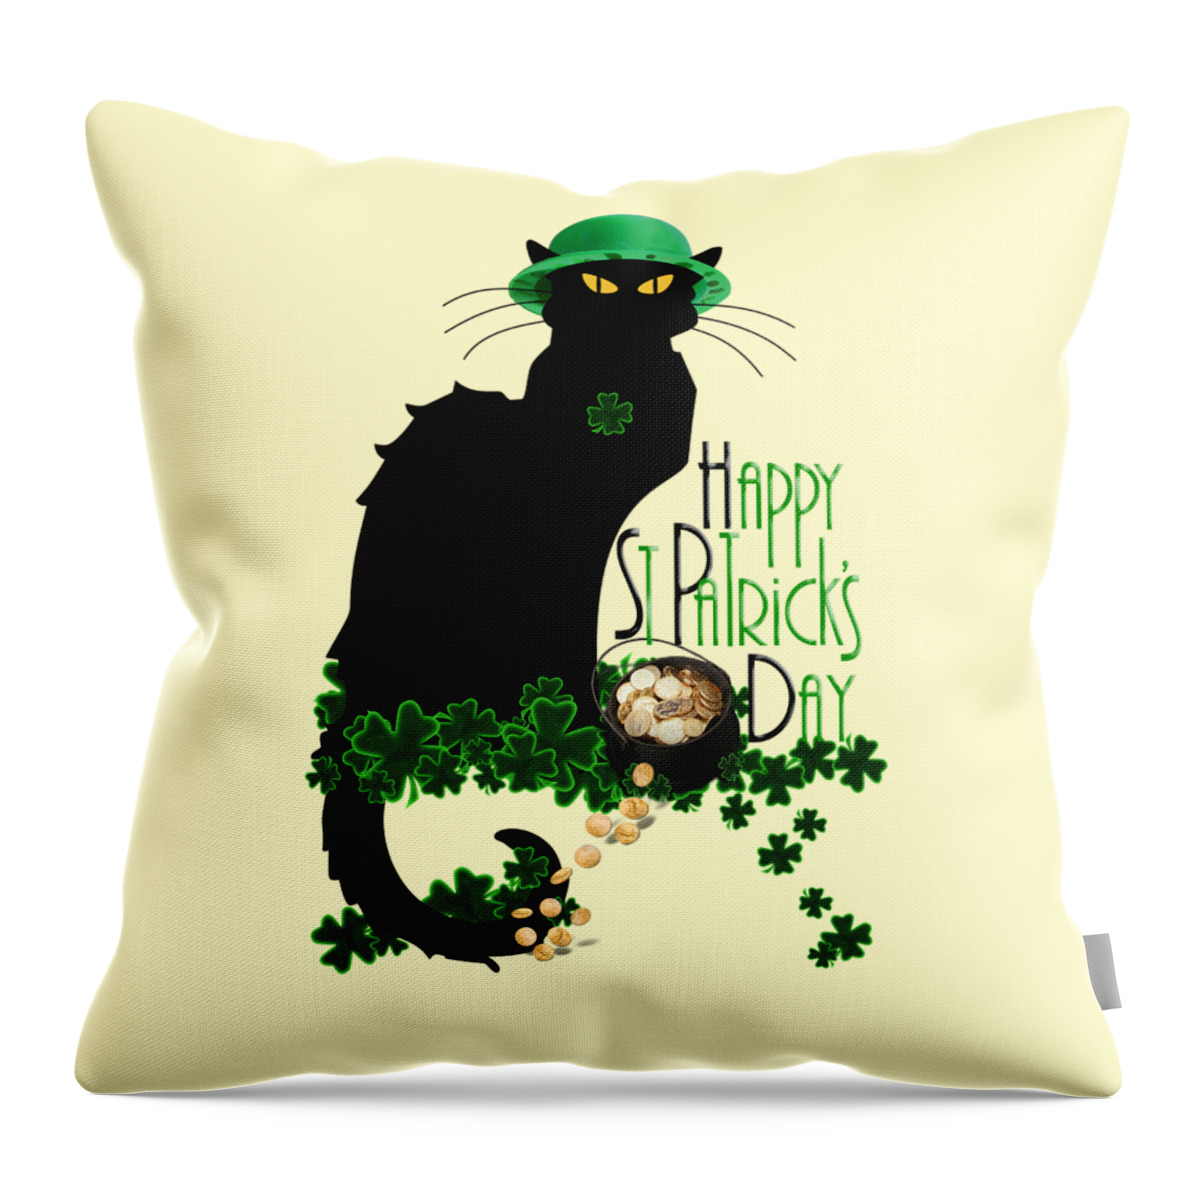 St Patrick's Day Throw Pillow featuring the digital art St Patrick's Day - Le Chat Noir by Gravityx9 Designs